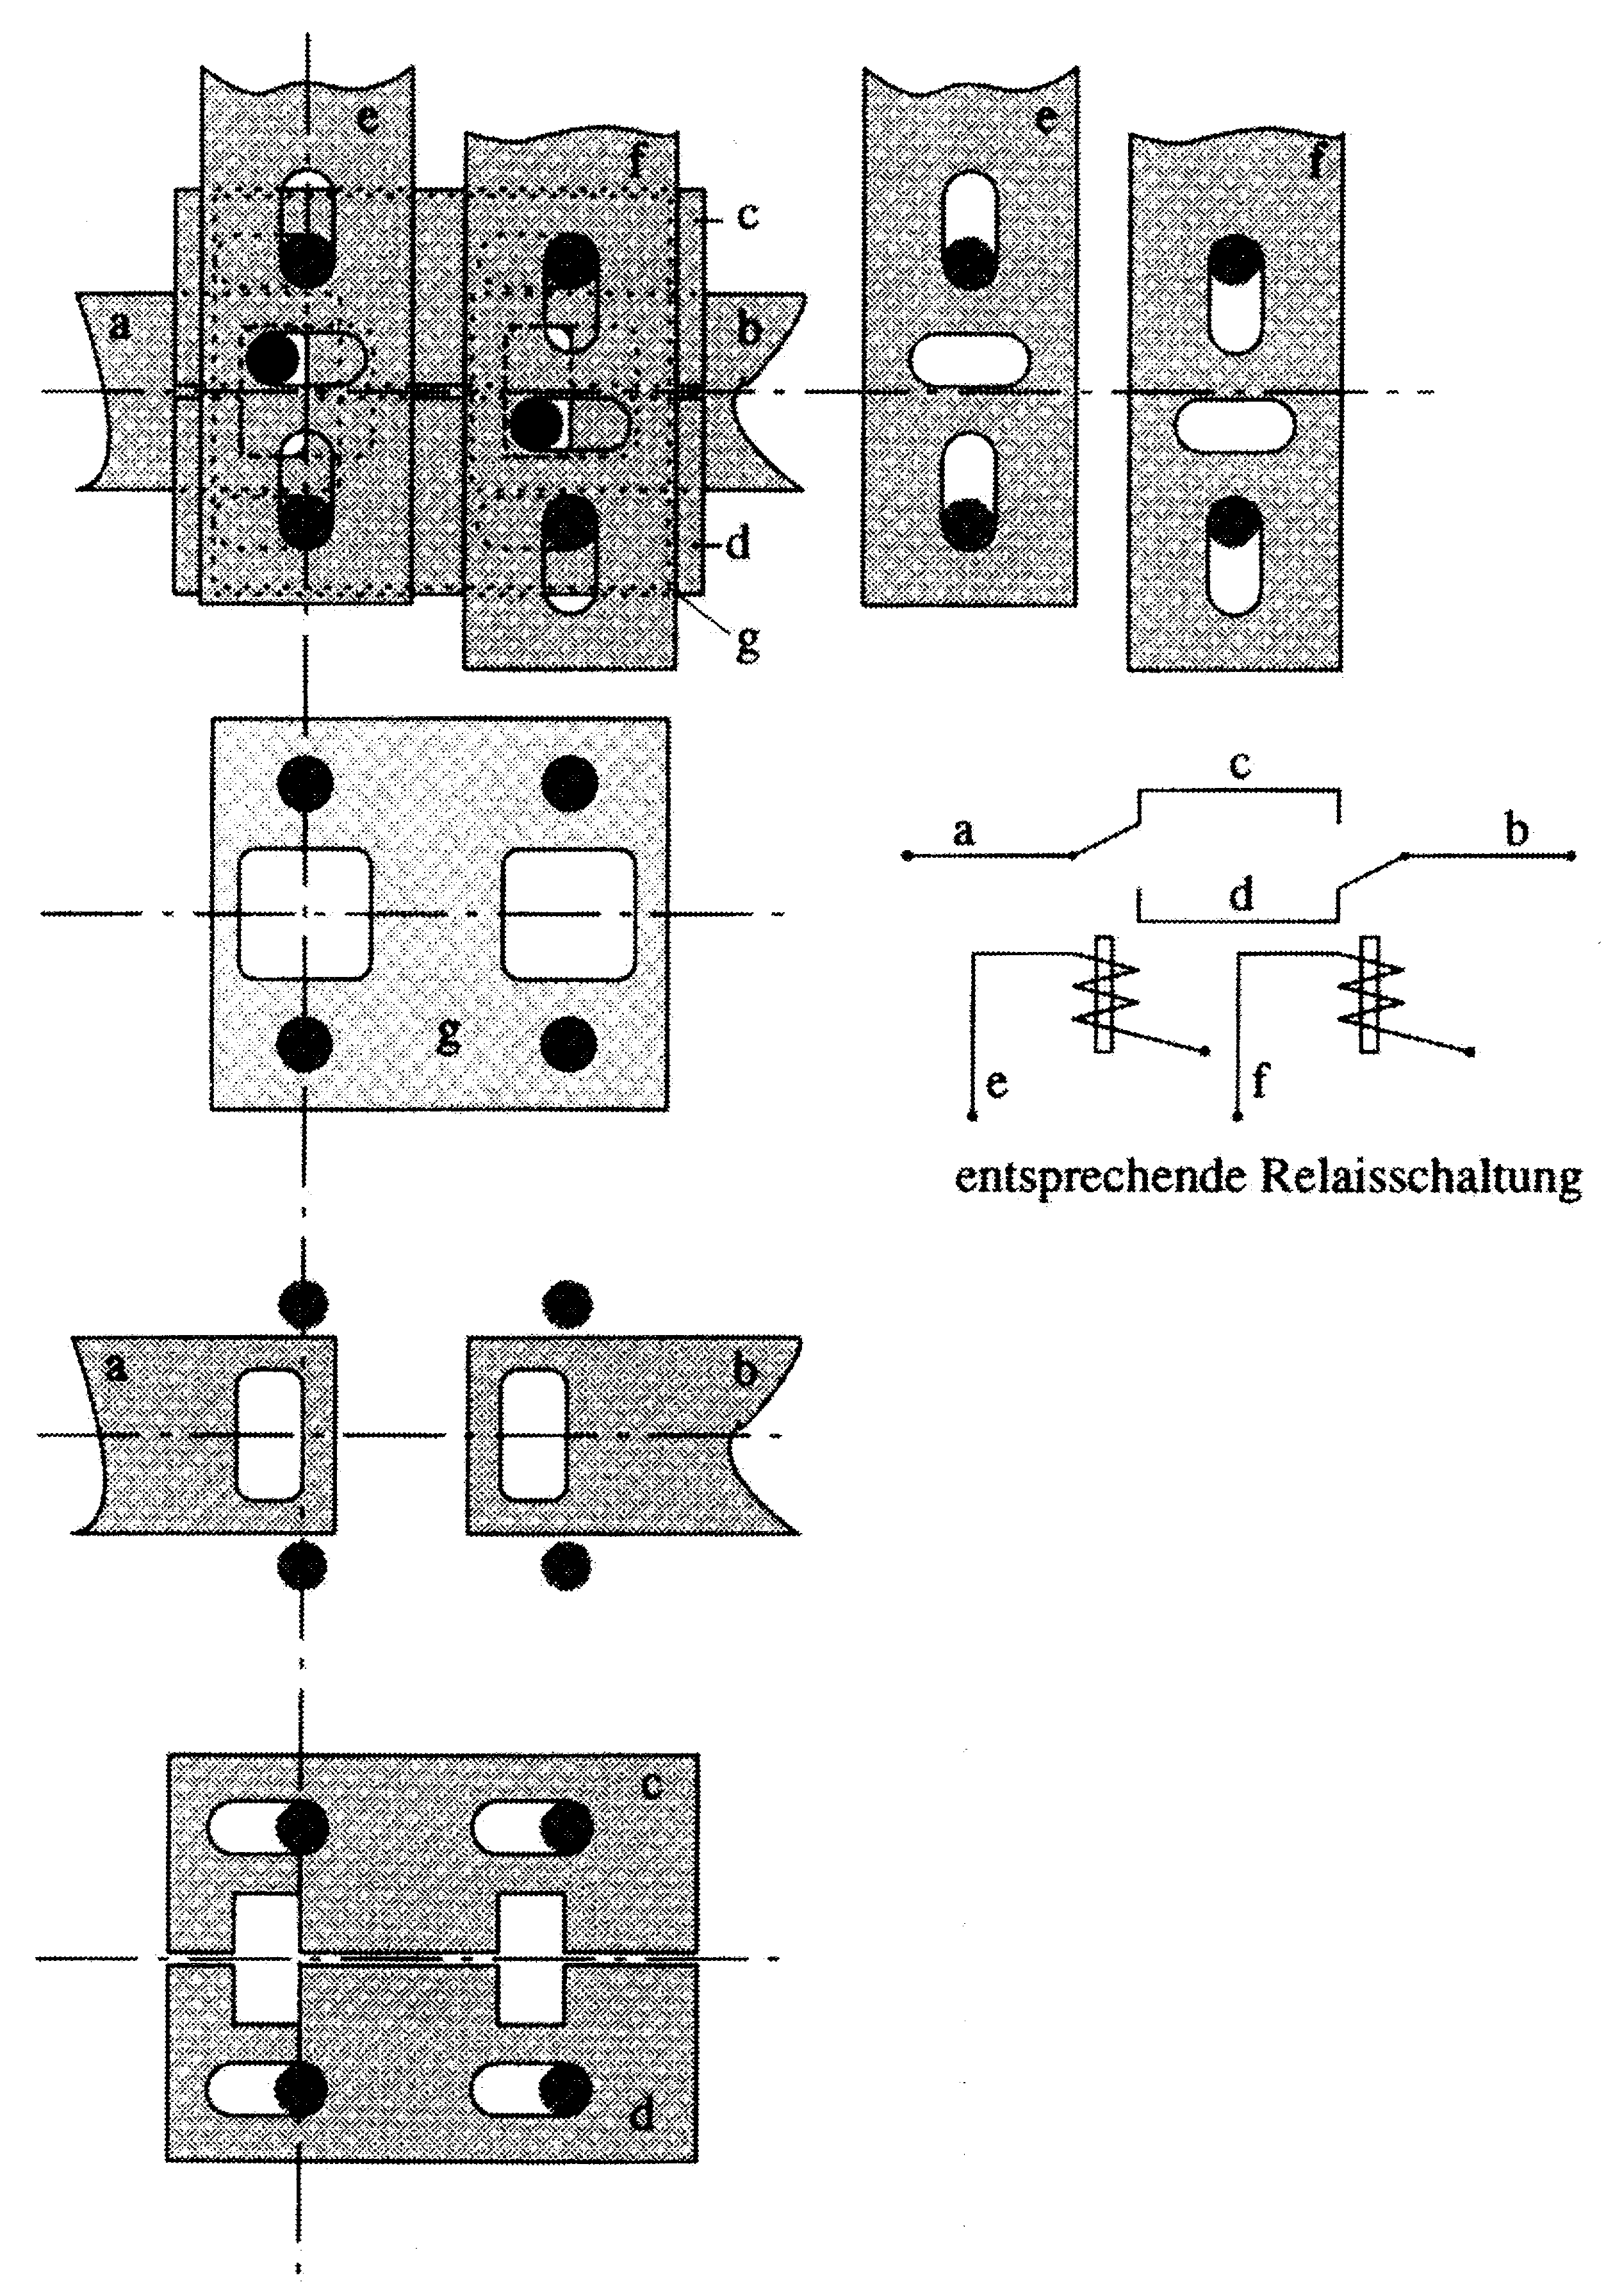 Image 4 Circuit of the logic equivalent, shwoing stacked plates, separate plates and a schematic relay equivalent